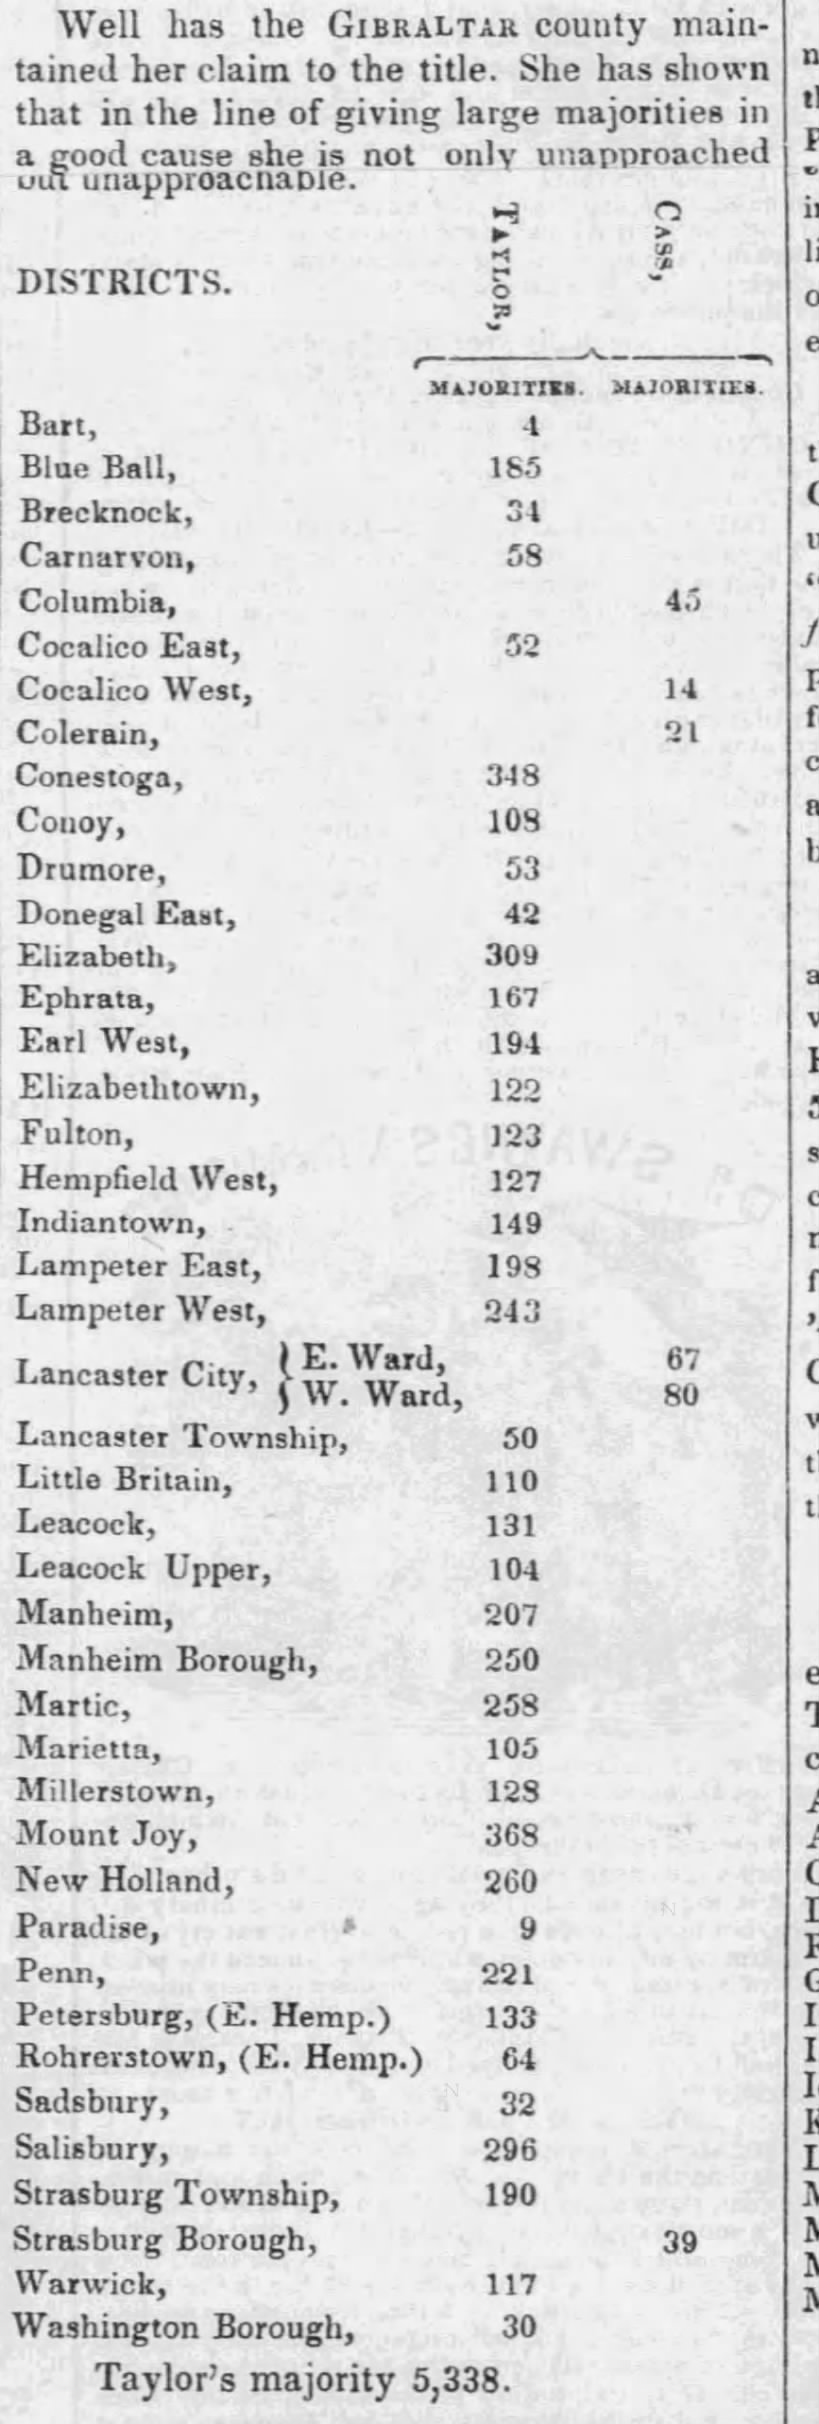 Lancaster County, PA 1848 election results by town with majorities (including Little Brittain)